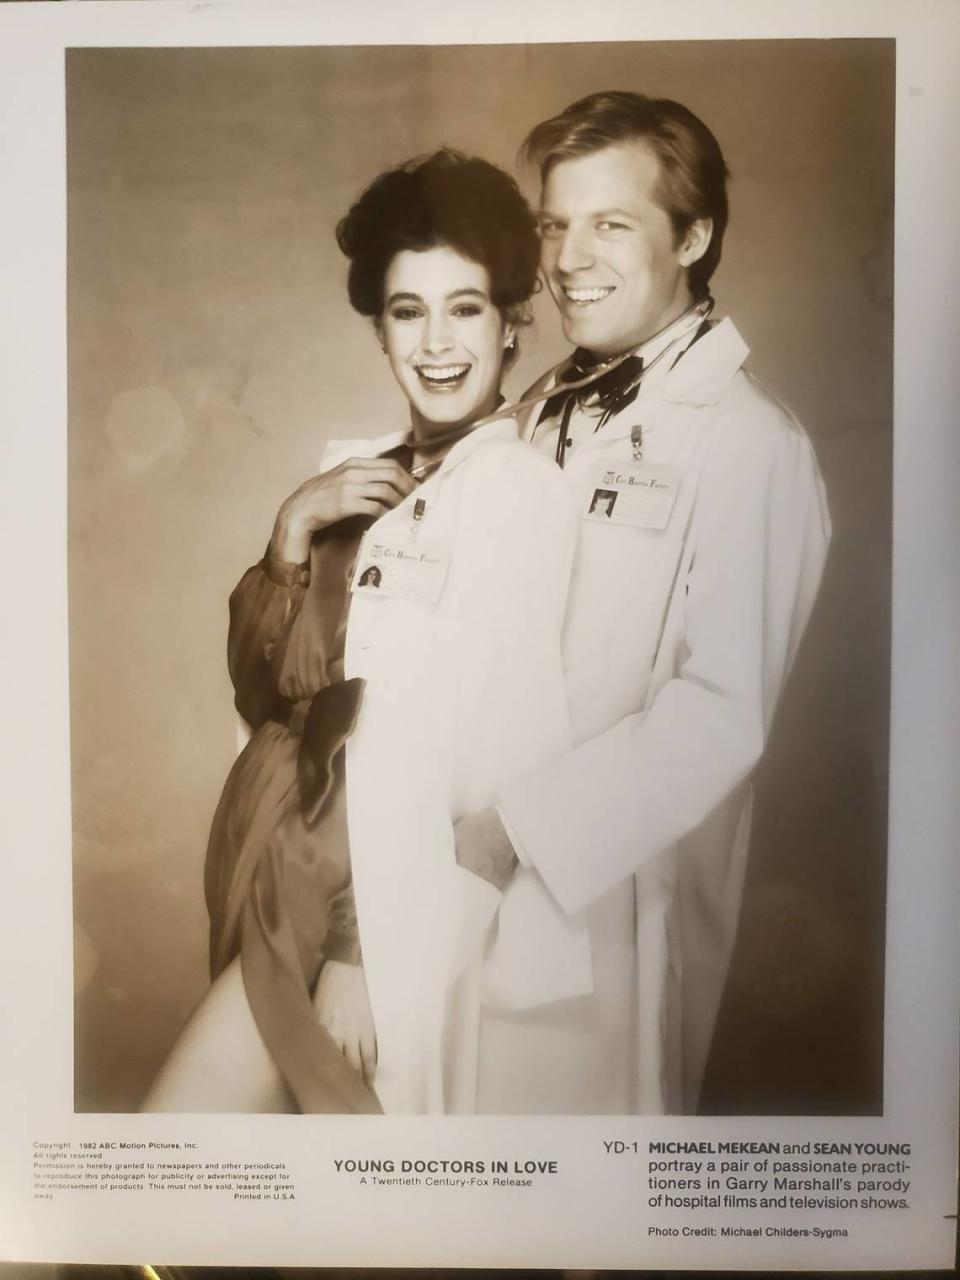 A vintage press photo for “Young Doctors in Love” shows Sean Young with Michael McKean. They starred in the comedy, which spoofed hospital soap operas, along with Harry Dean Stanton. The film will be part of the annual Harry Dean Stanton Festival and Young will reminisce about working with fellow Kentucky actor Stanton.